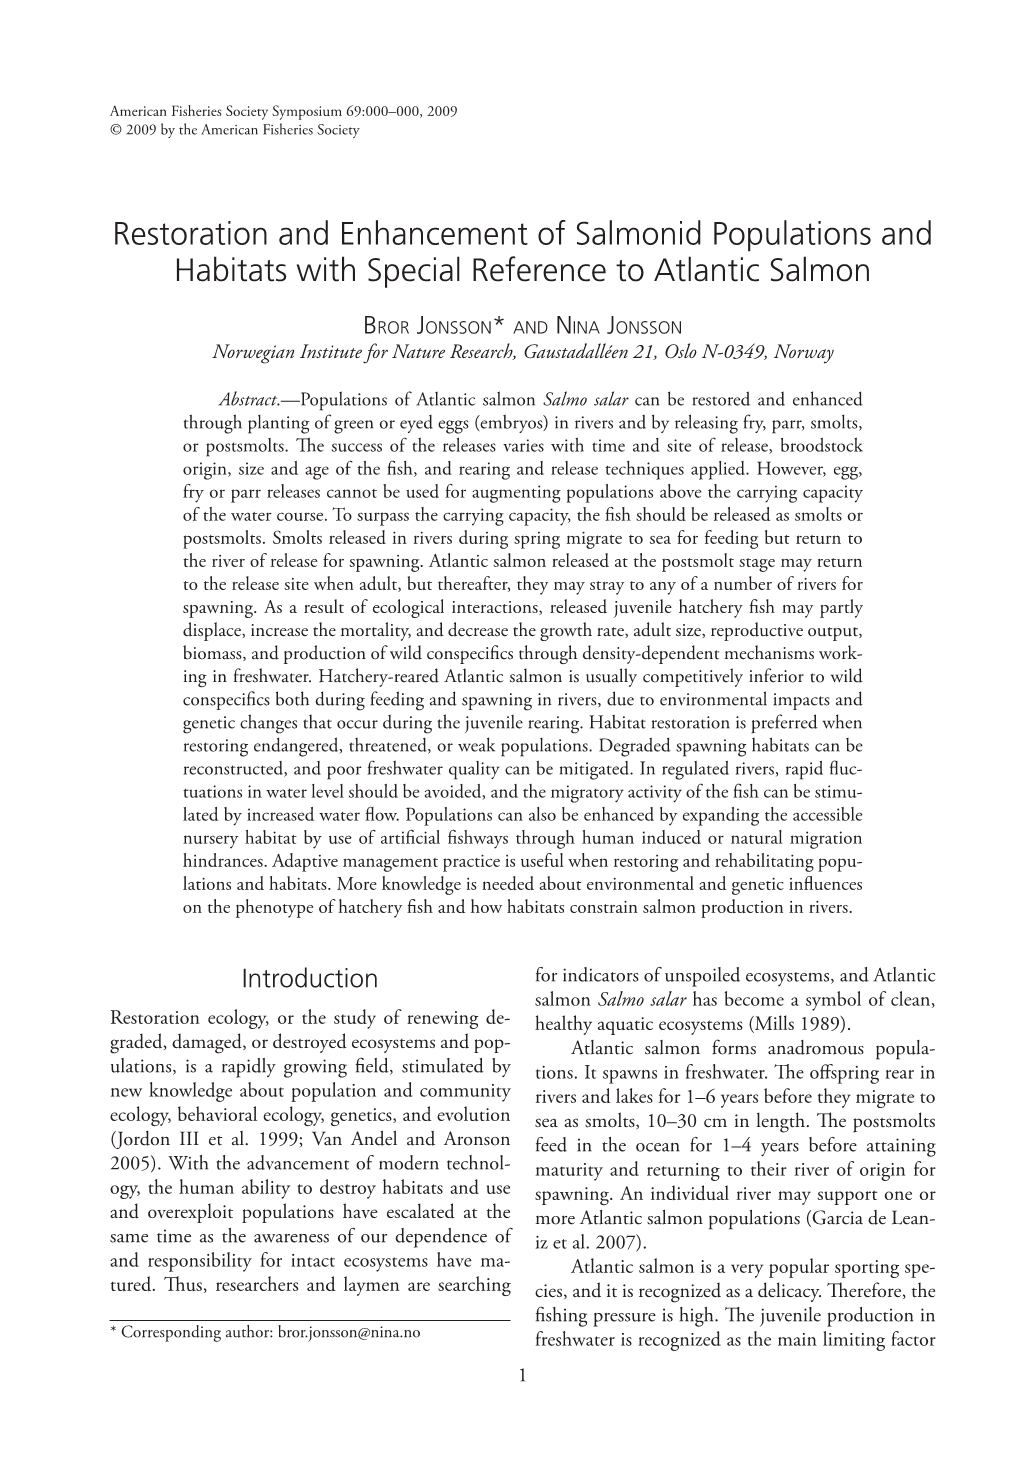 Restoration and Enhancement of Salmonid Populations and Habitats with Special Reference to Atlantic Salmon